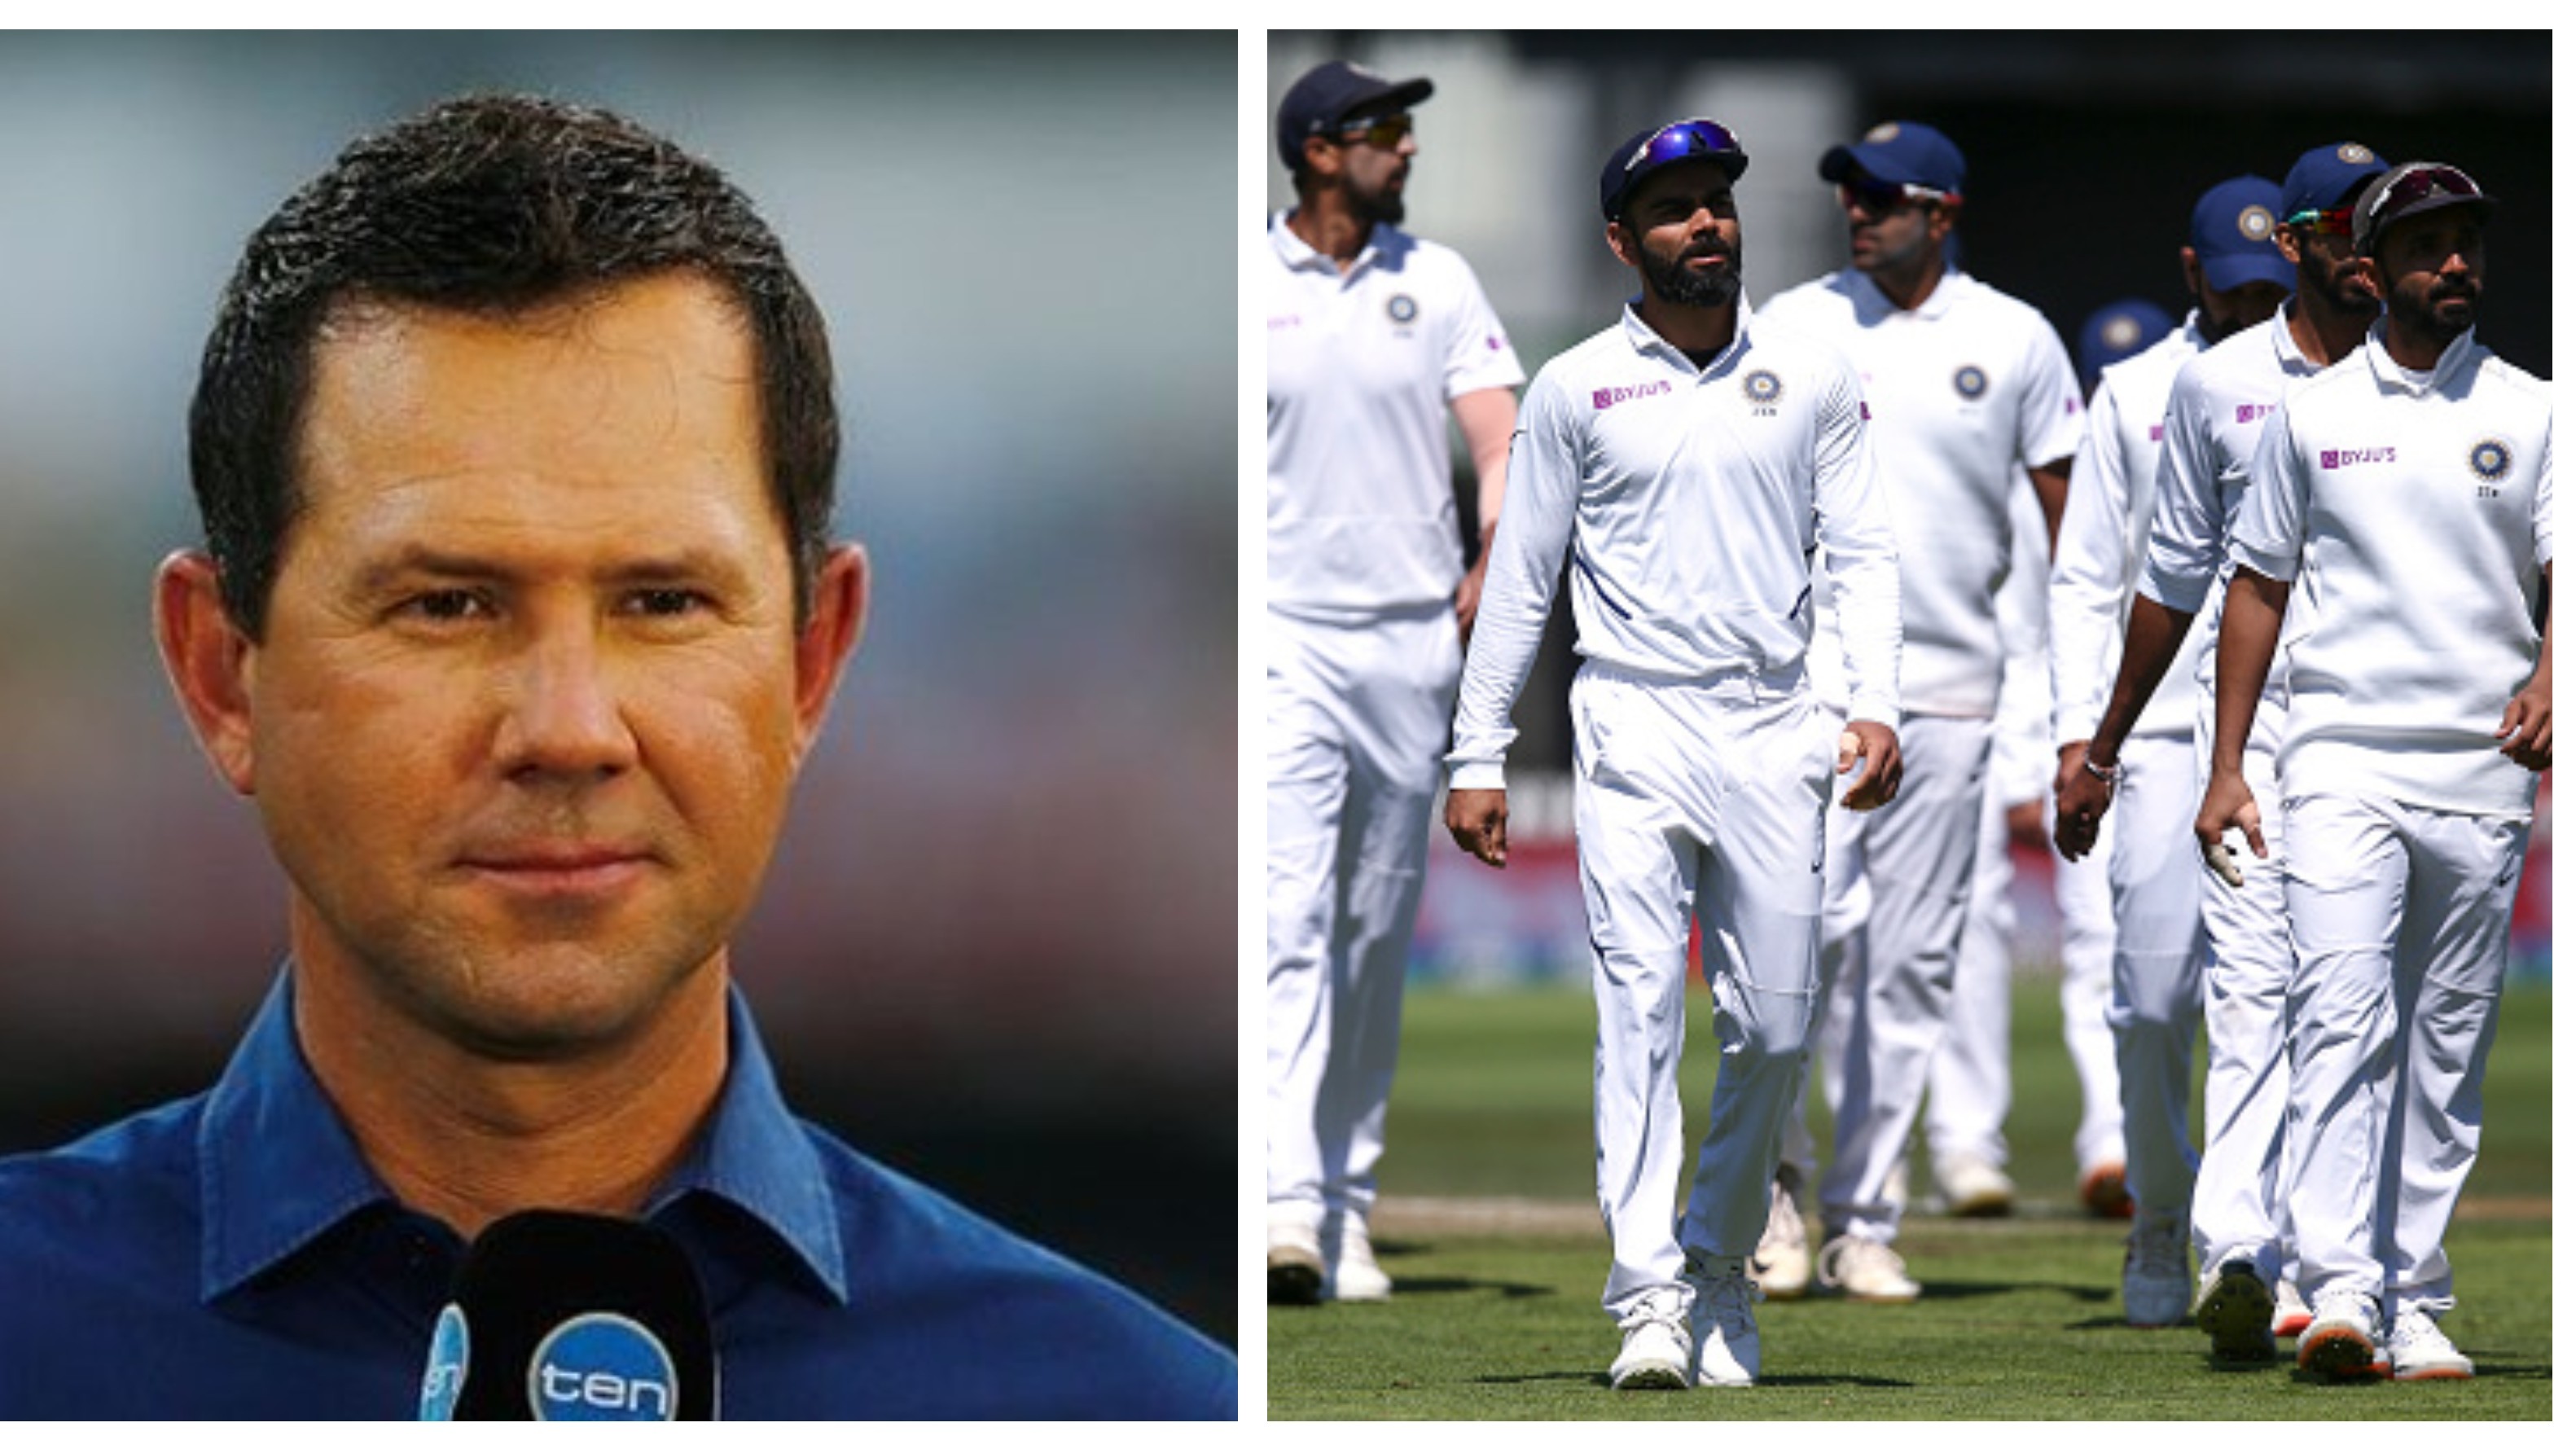 AUS v IND 2020-21: India far from settled, Virat Kohli's absence to add to their woes, feels Ricky Ponting